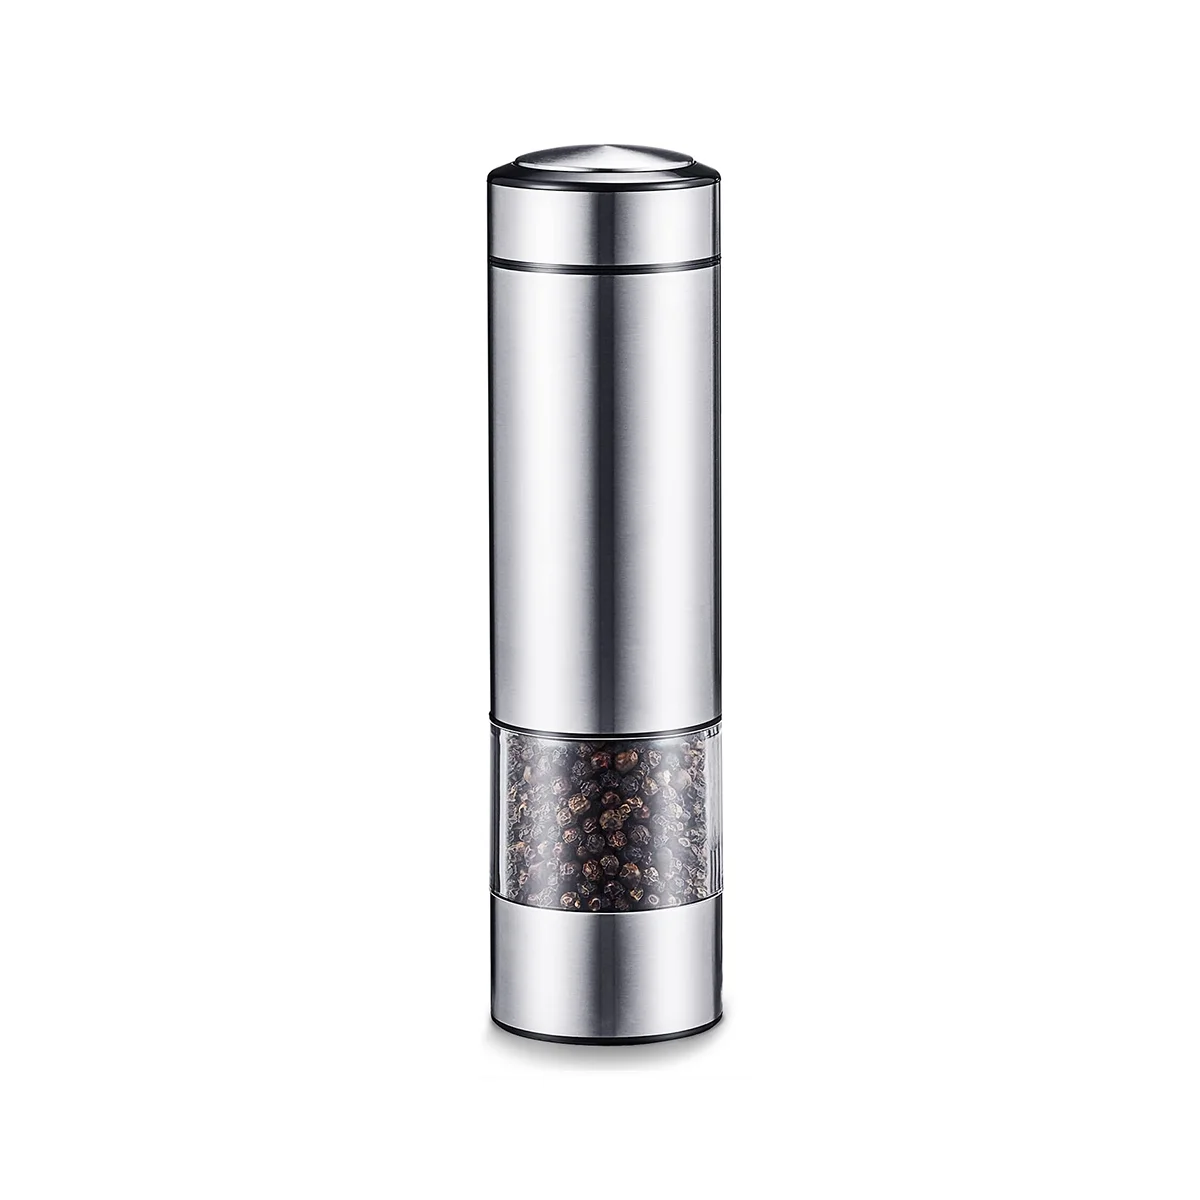 

Electric Pepper Grinder, Automatic Pepper Mill Grinder, Stainless Steel Battery Operated Salt Grinder Refillable